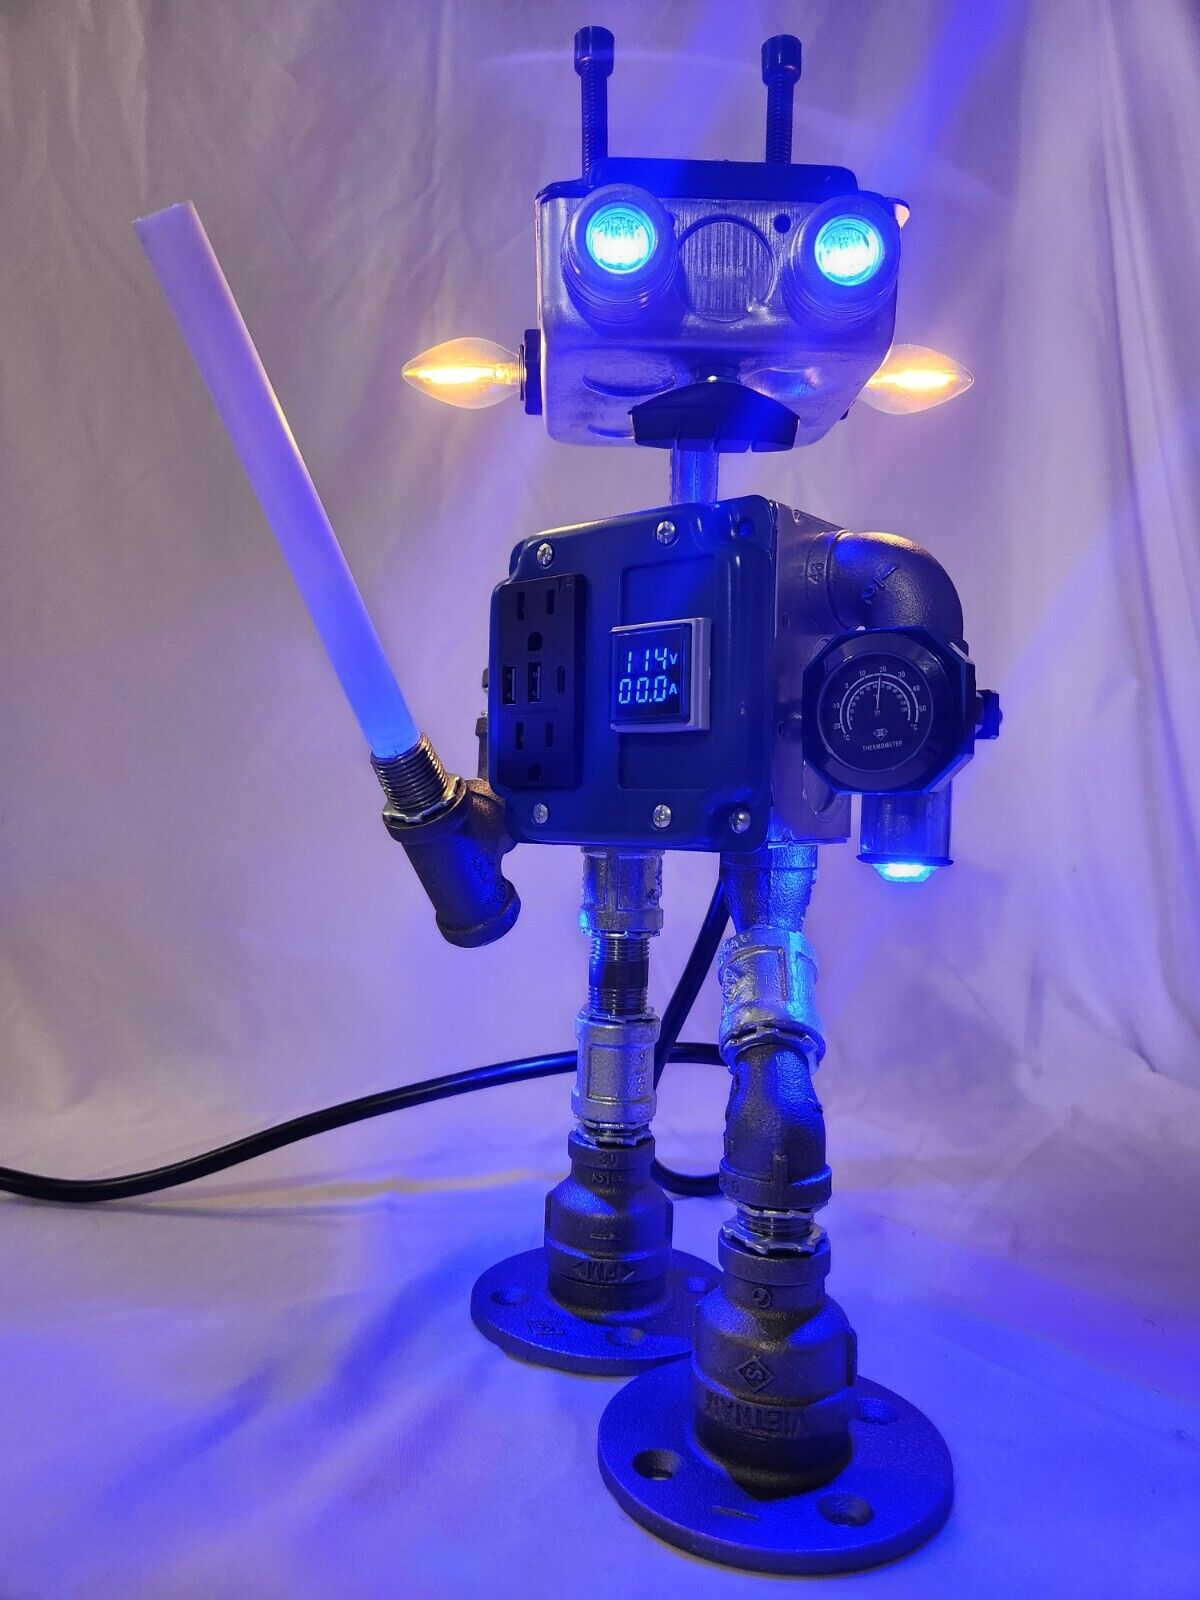 Star Wars Themed Metal Robot Statue Blue Armor #2 of 2